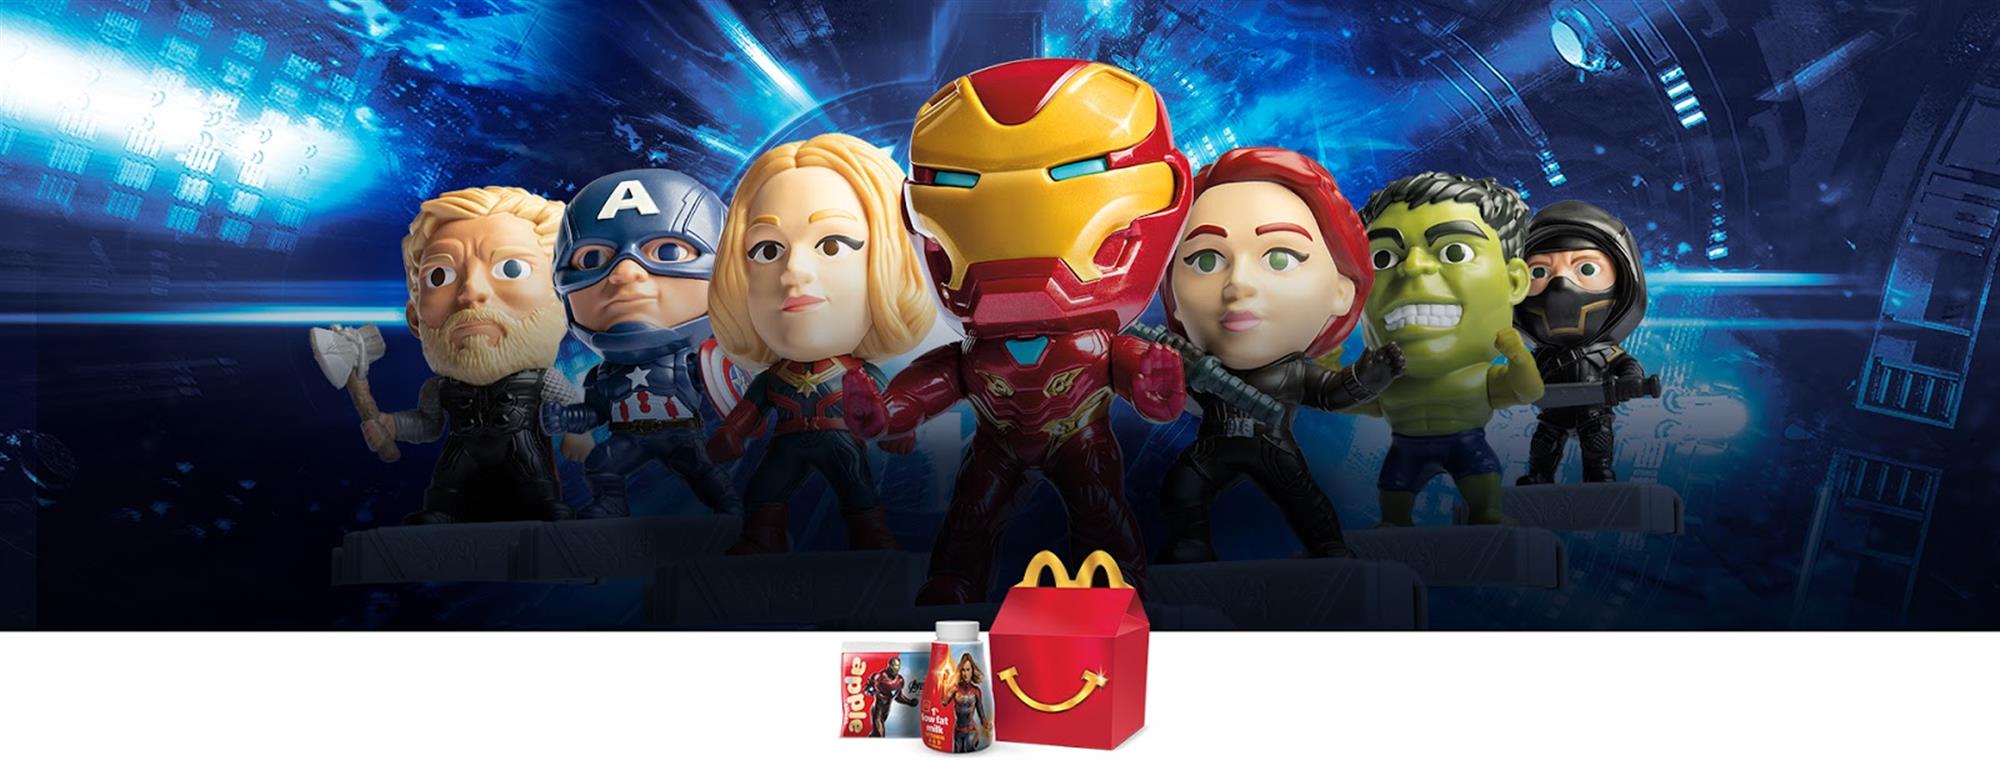 Mcdonald's Avengers Endgame 2019 Happy Meal Toy SHIPS SAME DAY 